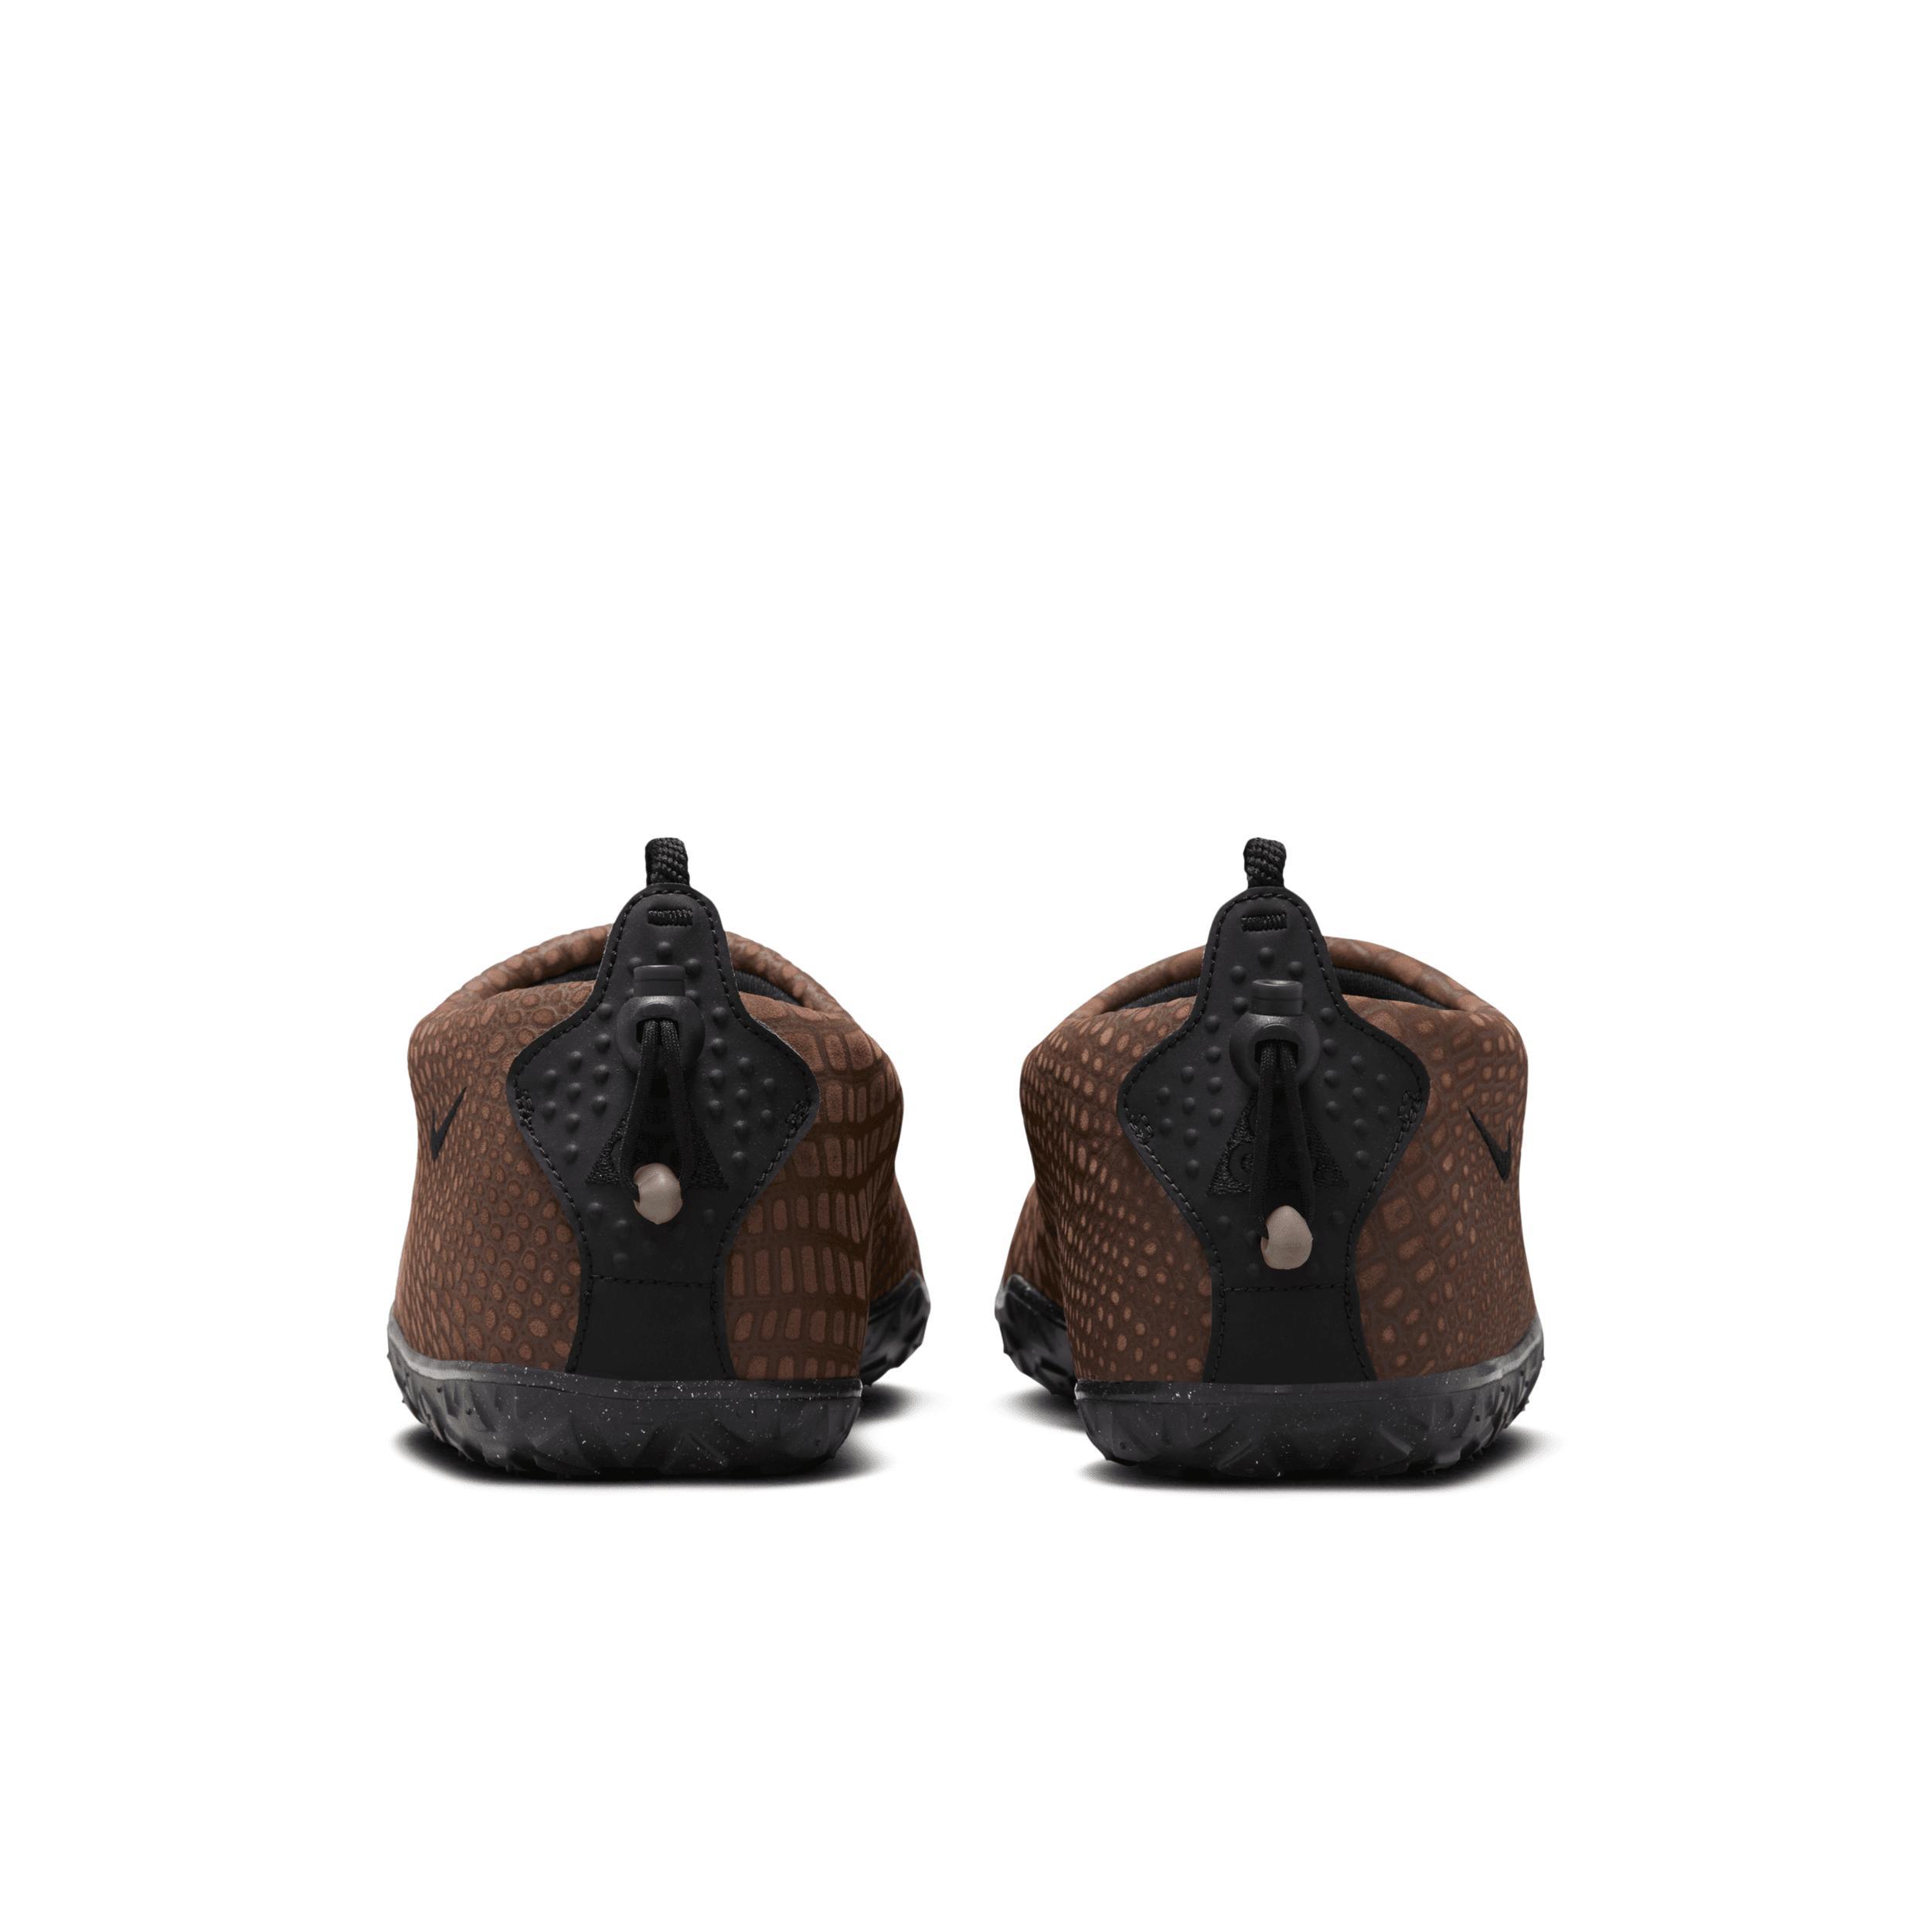 Nike Acg Moc Premium in Brown. - size 11.5 (also in 10, 10.5, 11, 12, 12.5, 13, 7, 7.5, 8, 8.5, 9, 9.5) Product Image